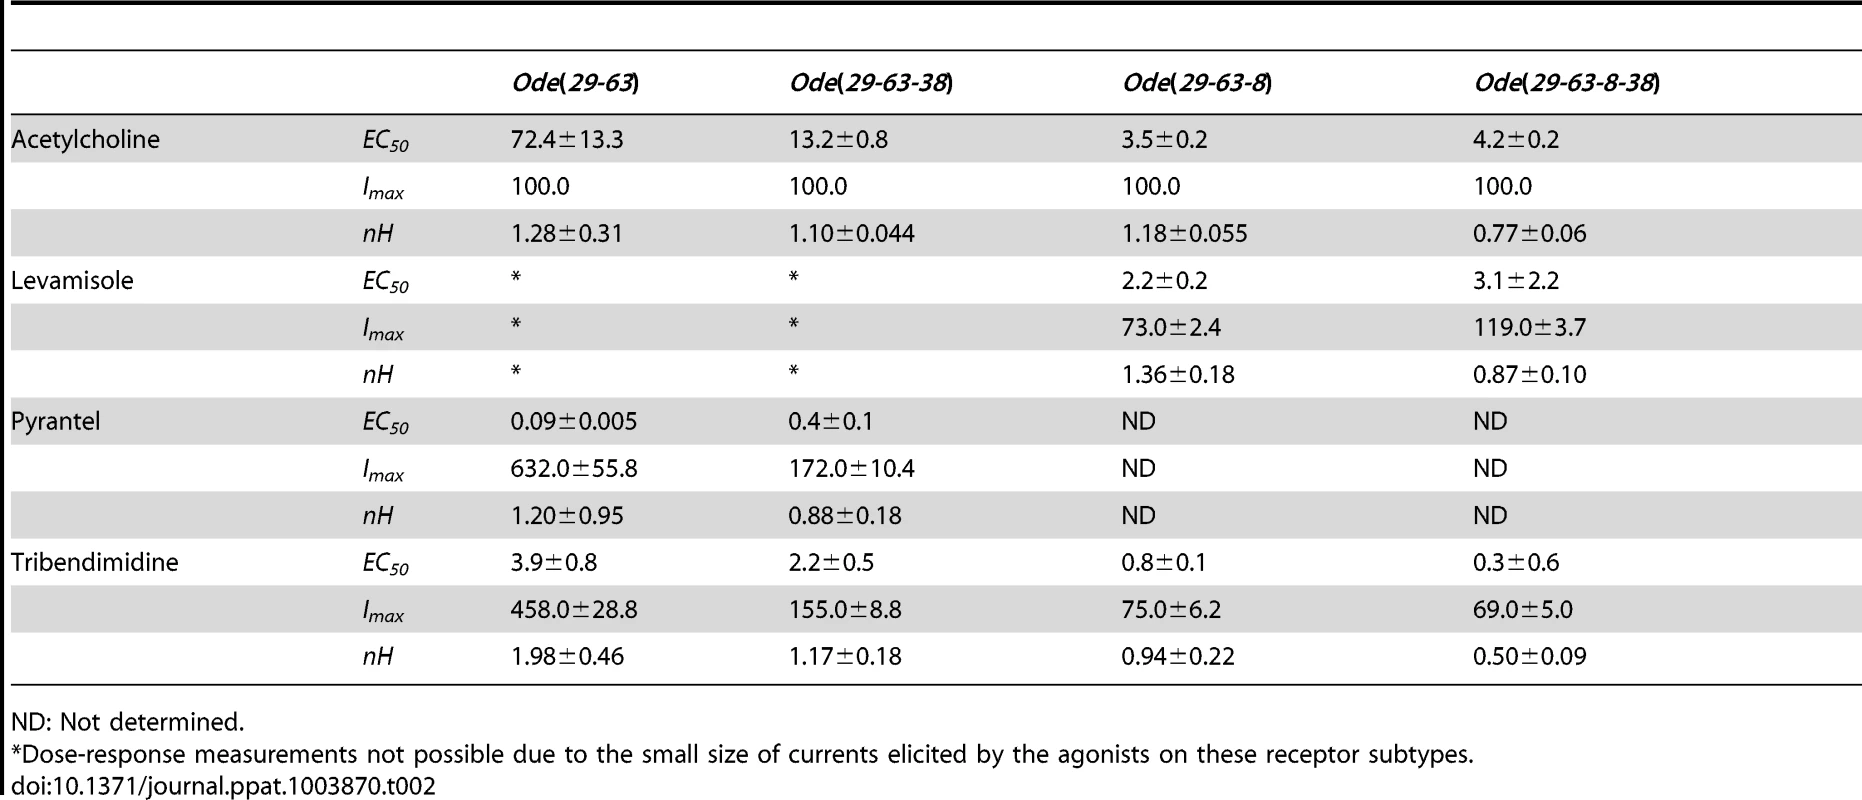 Properties of the four main receptor subtypes obtained from dose-response relationships.